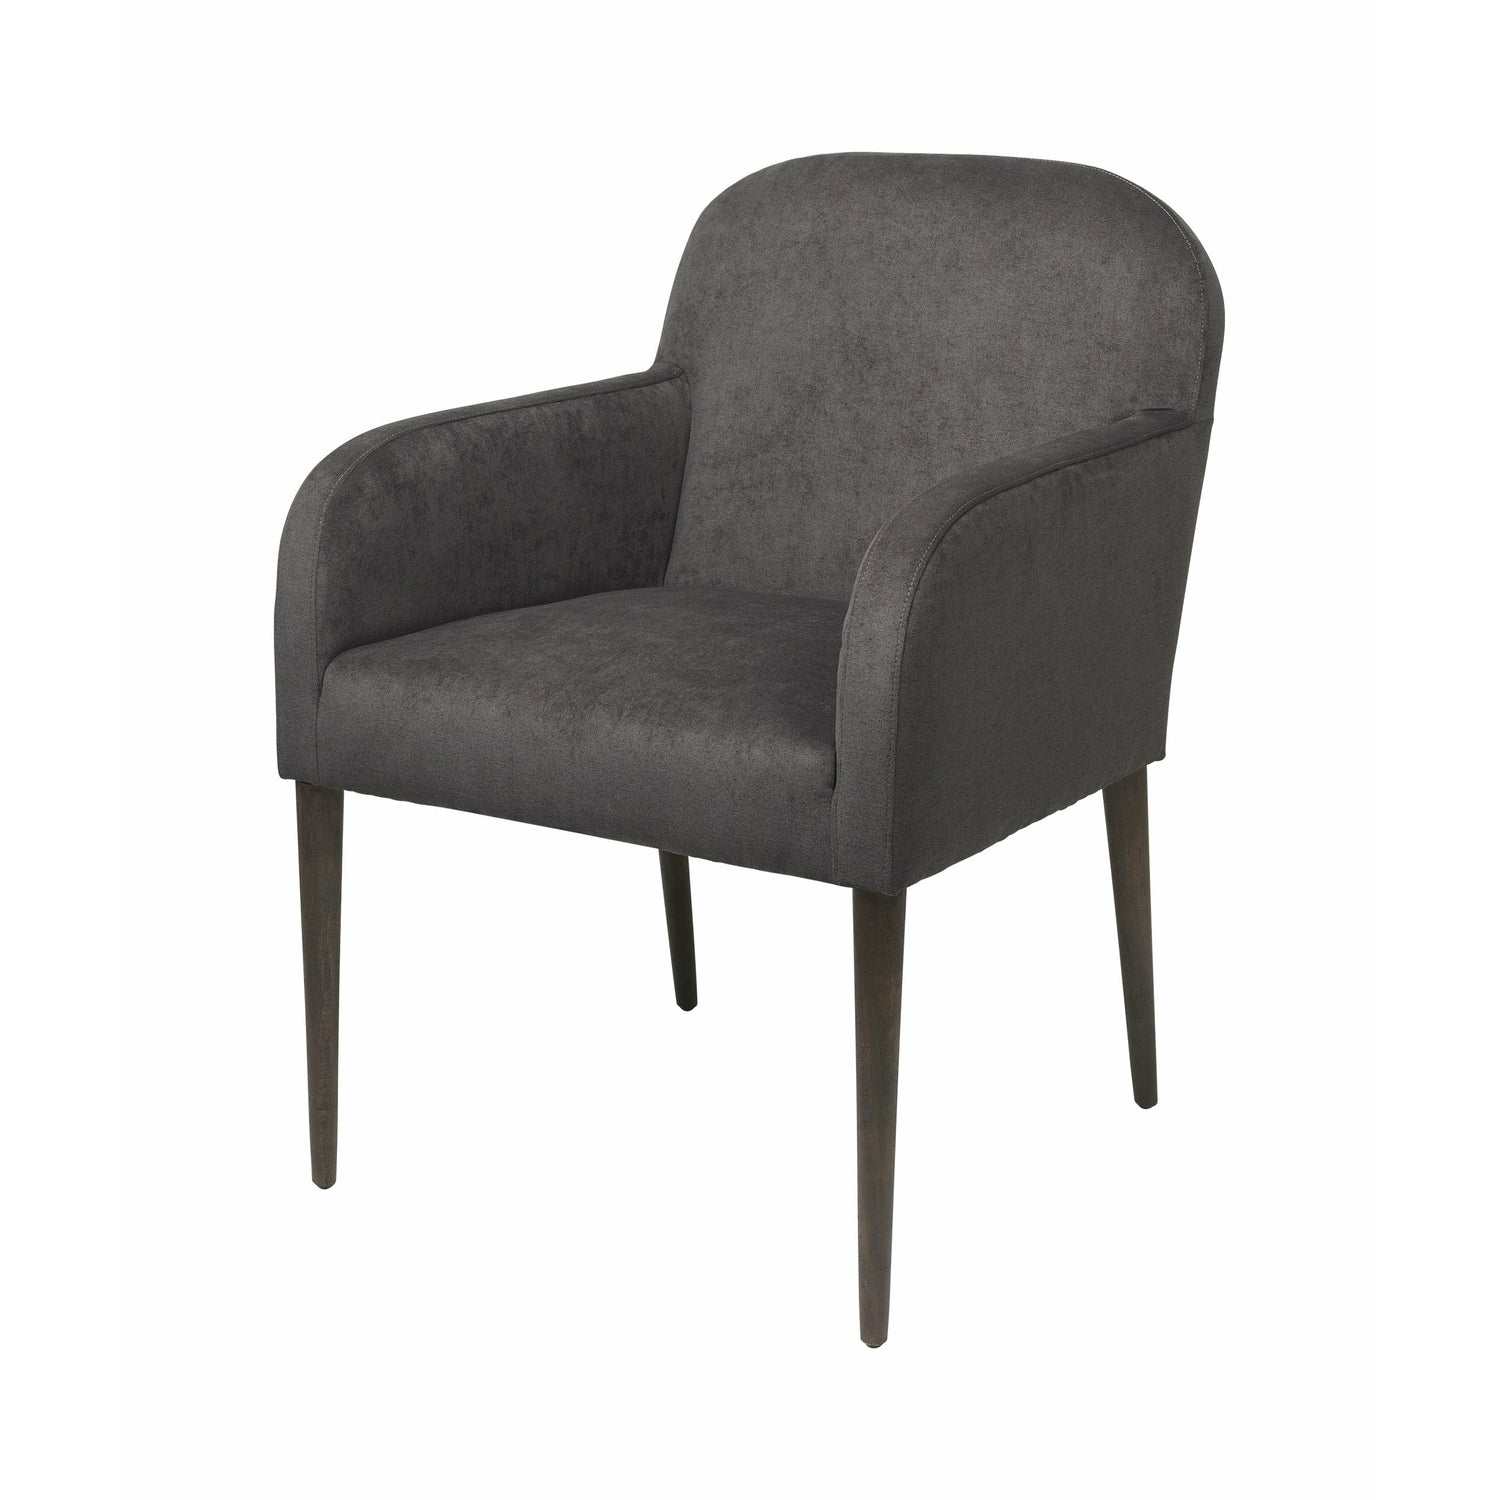 Cosy Living Gotland Dining Chair - Storm*